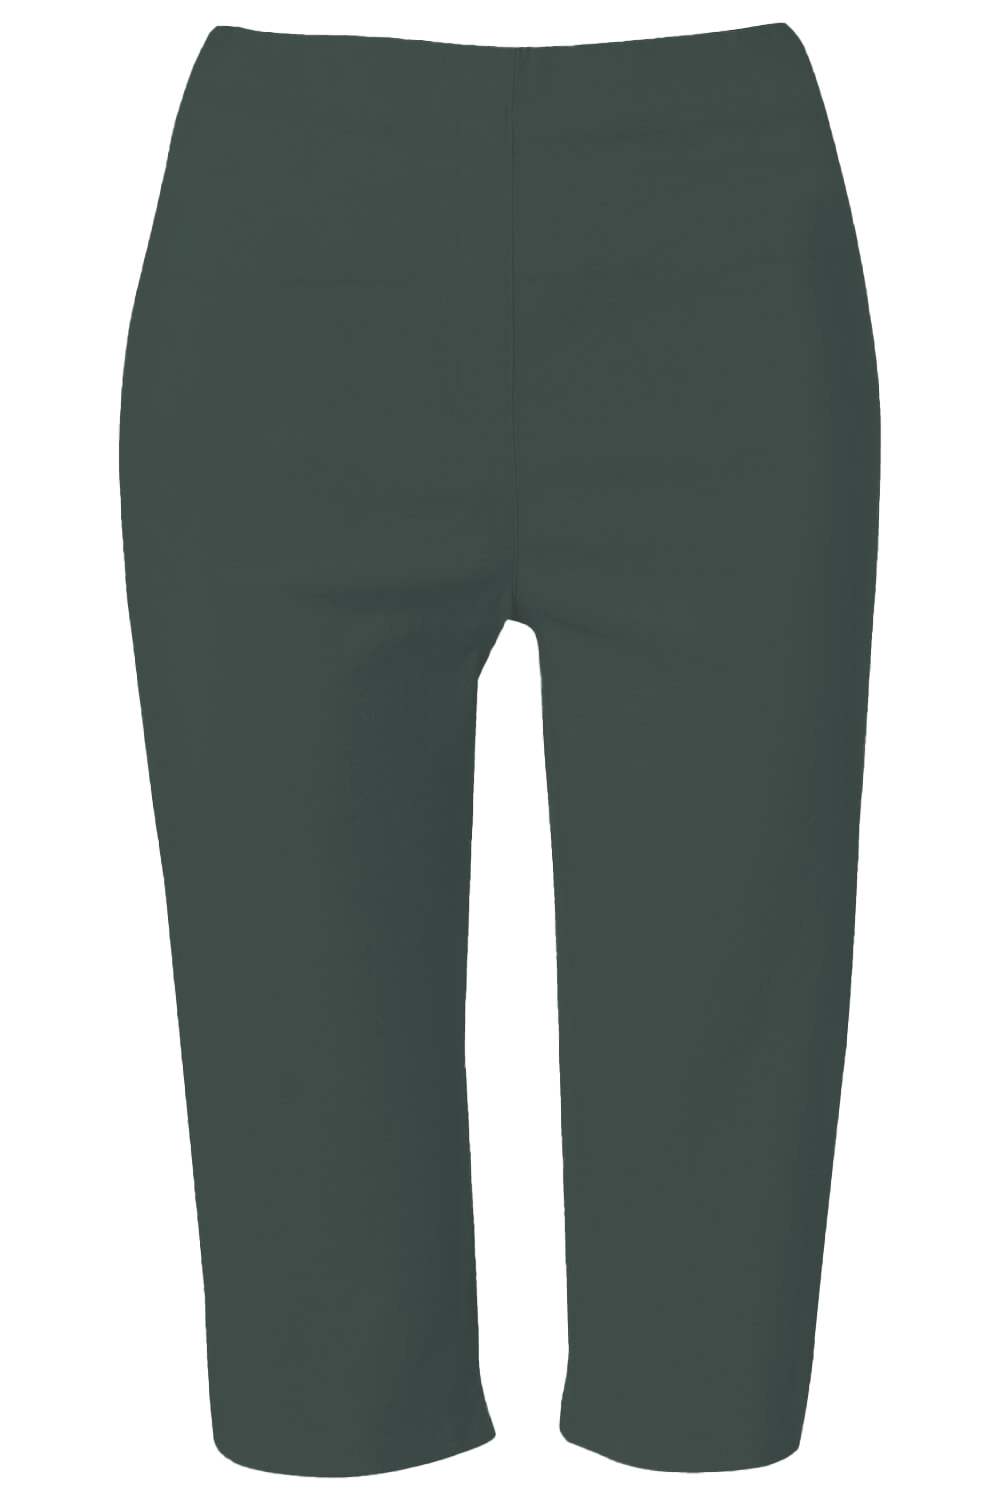 Forest  Knee Length Stretch Shorts, Image 6 of 6